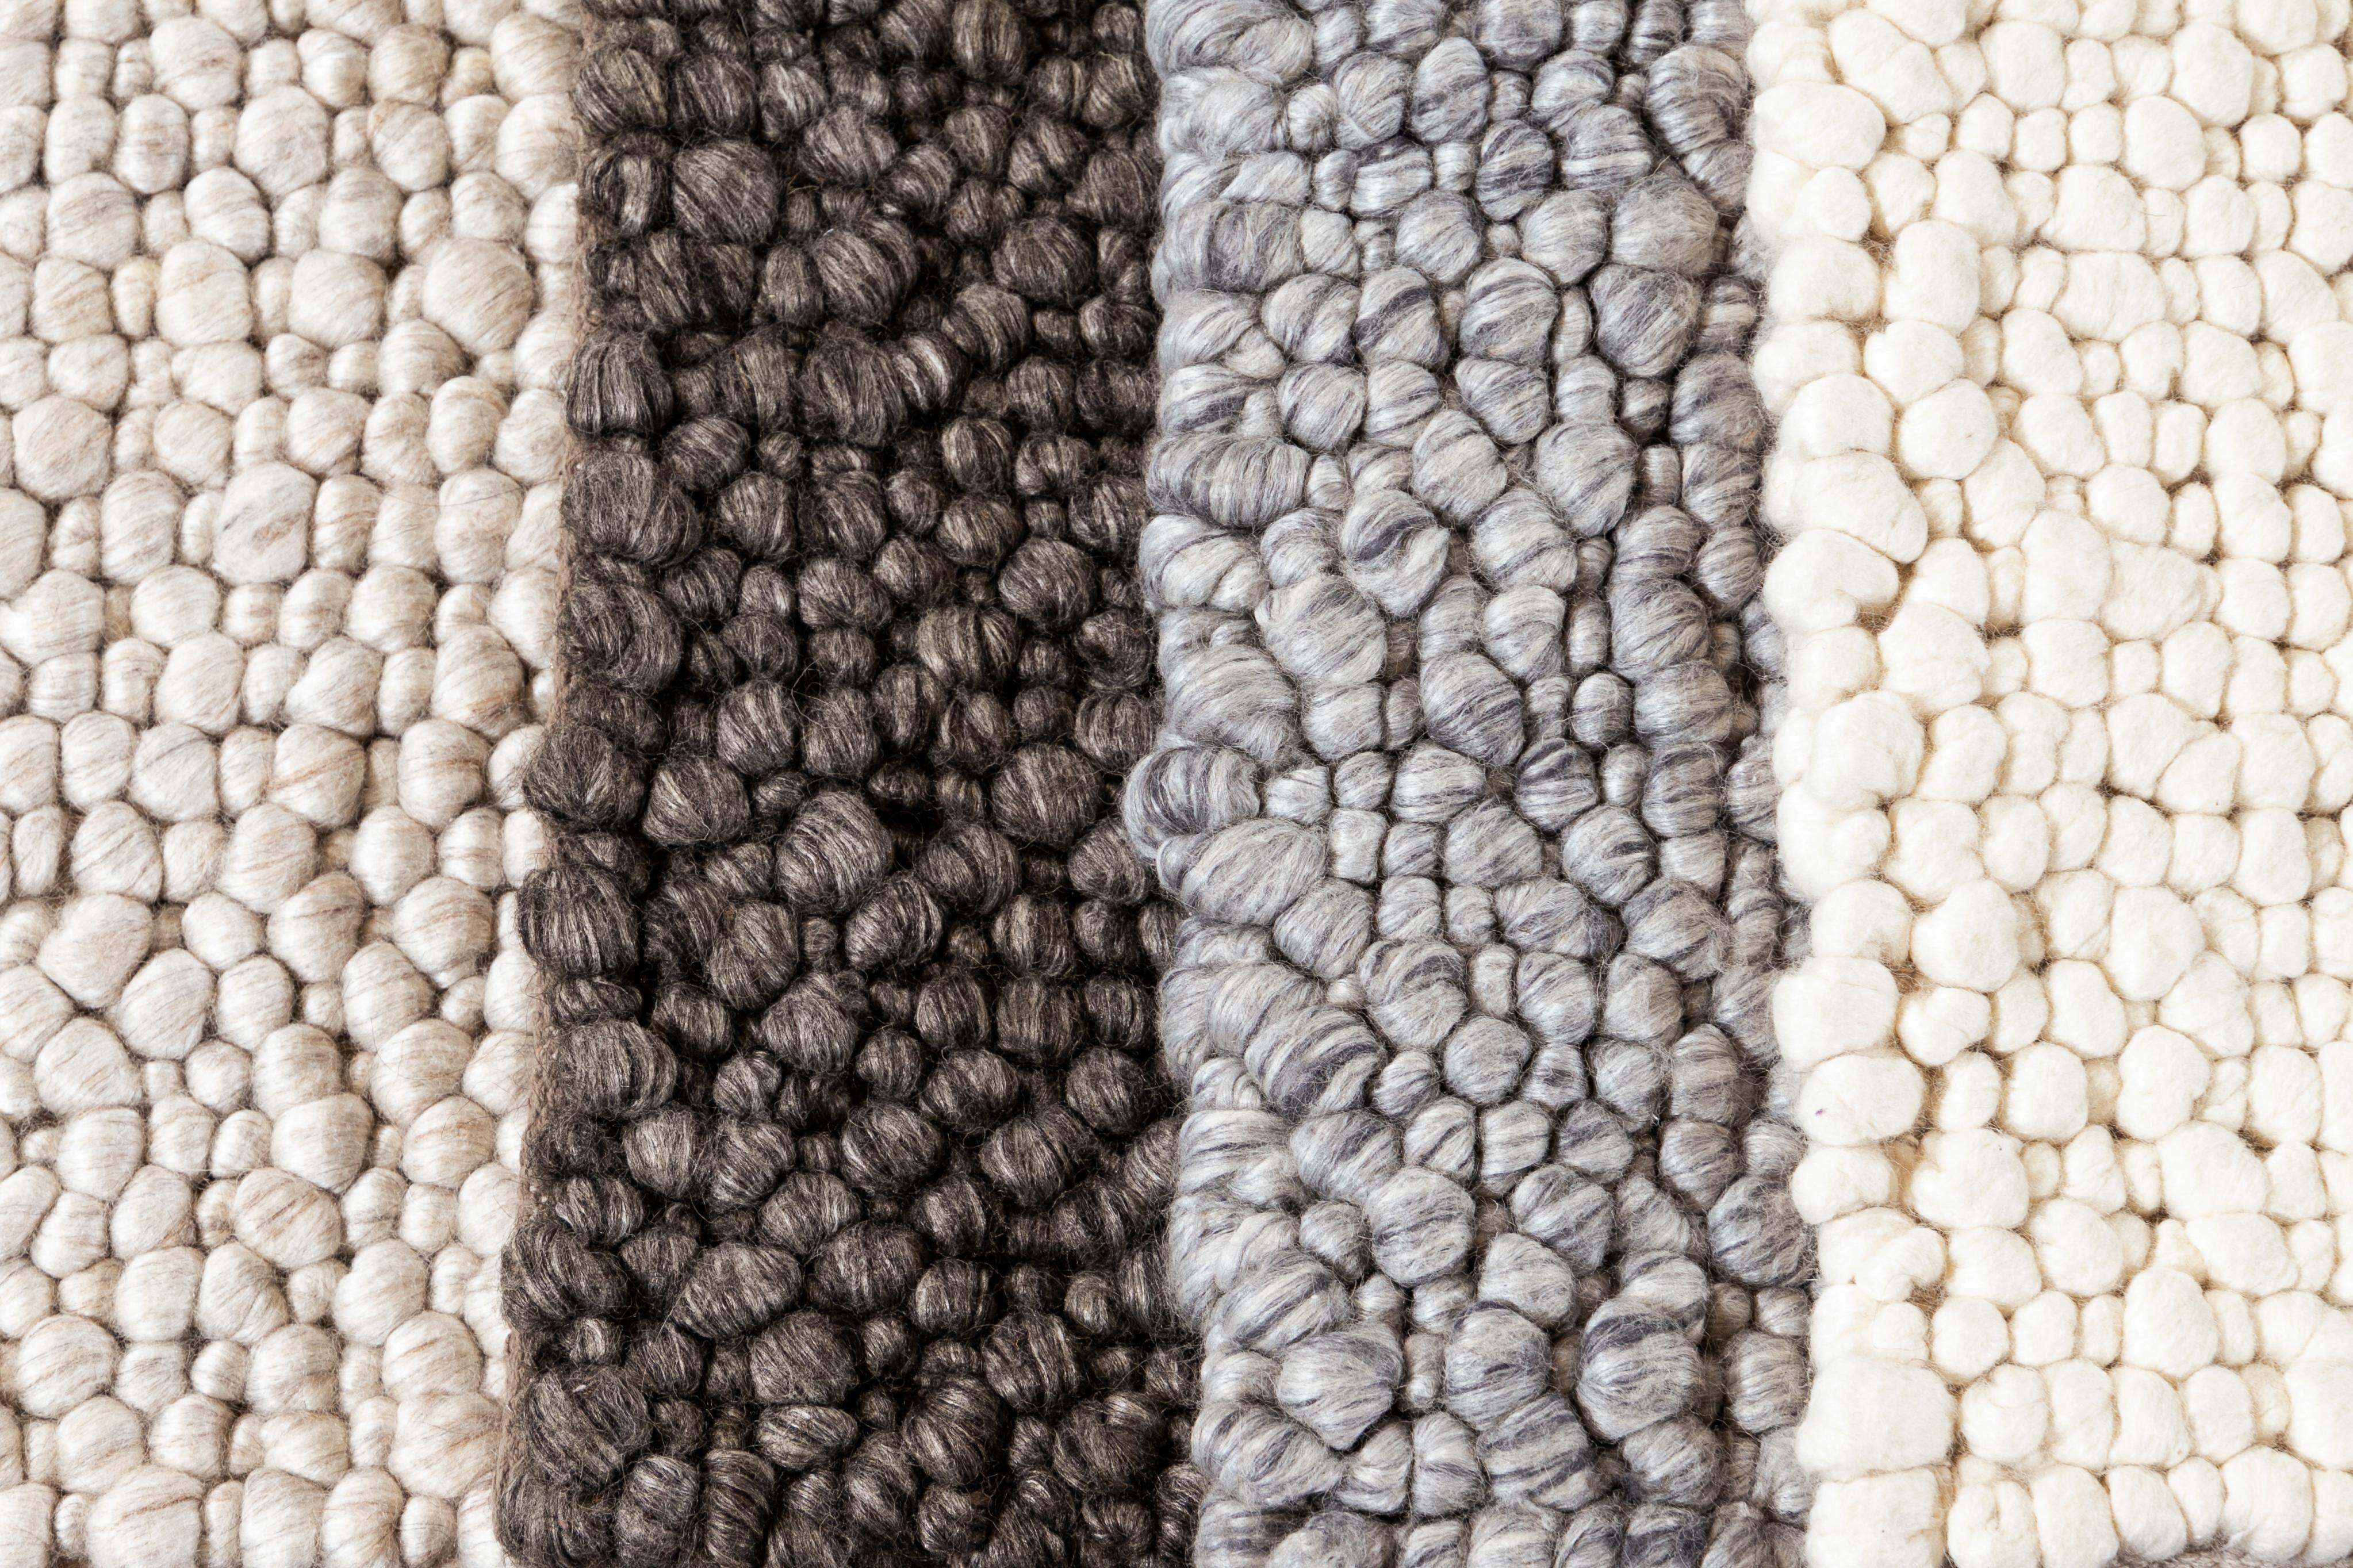 Textured wool custom rug. Custom sizes and colors made-to-order.

Material: New Zealand Wool
Lead time: Approx. 12 weeks
Available colors: As shown; other custom colors and styles available.
Made in India.